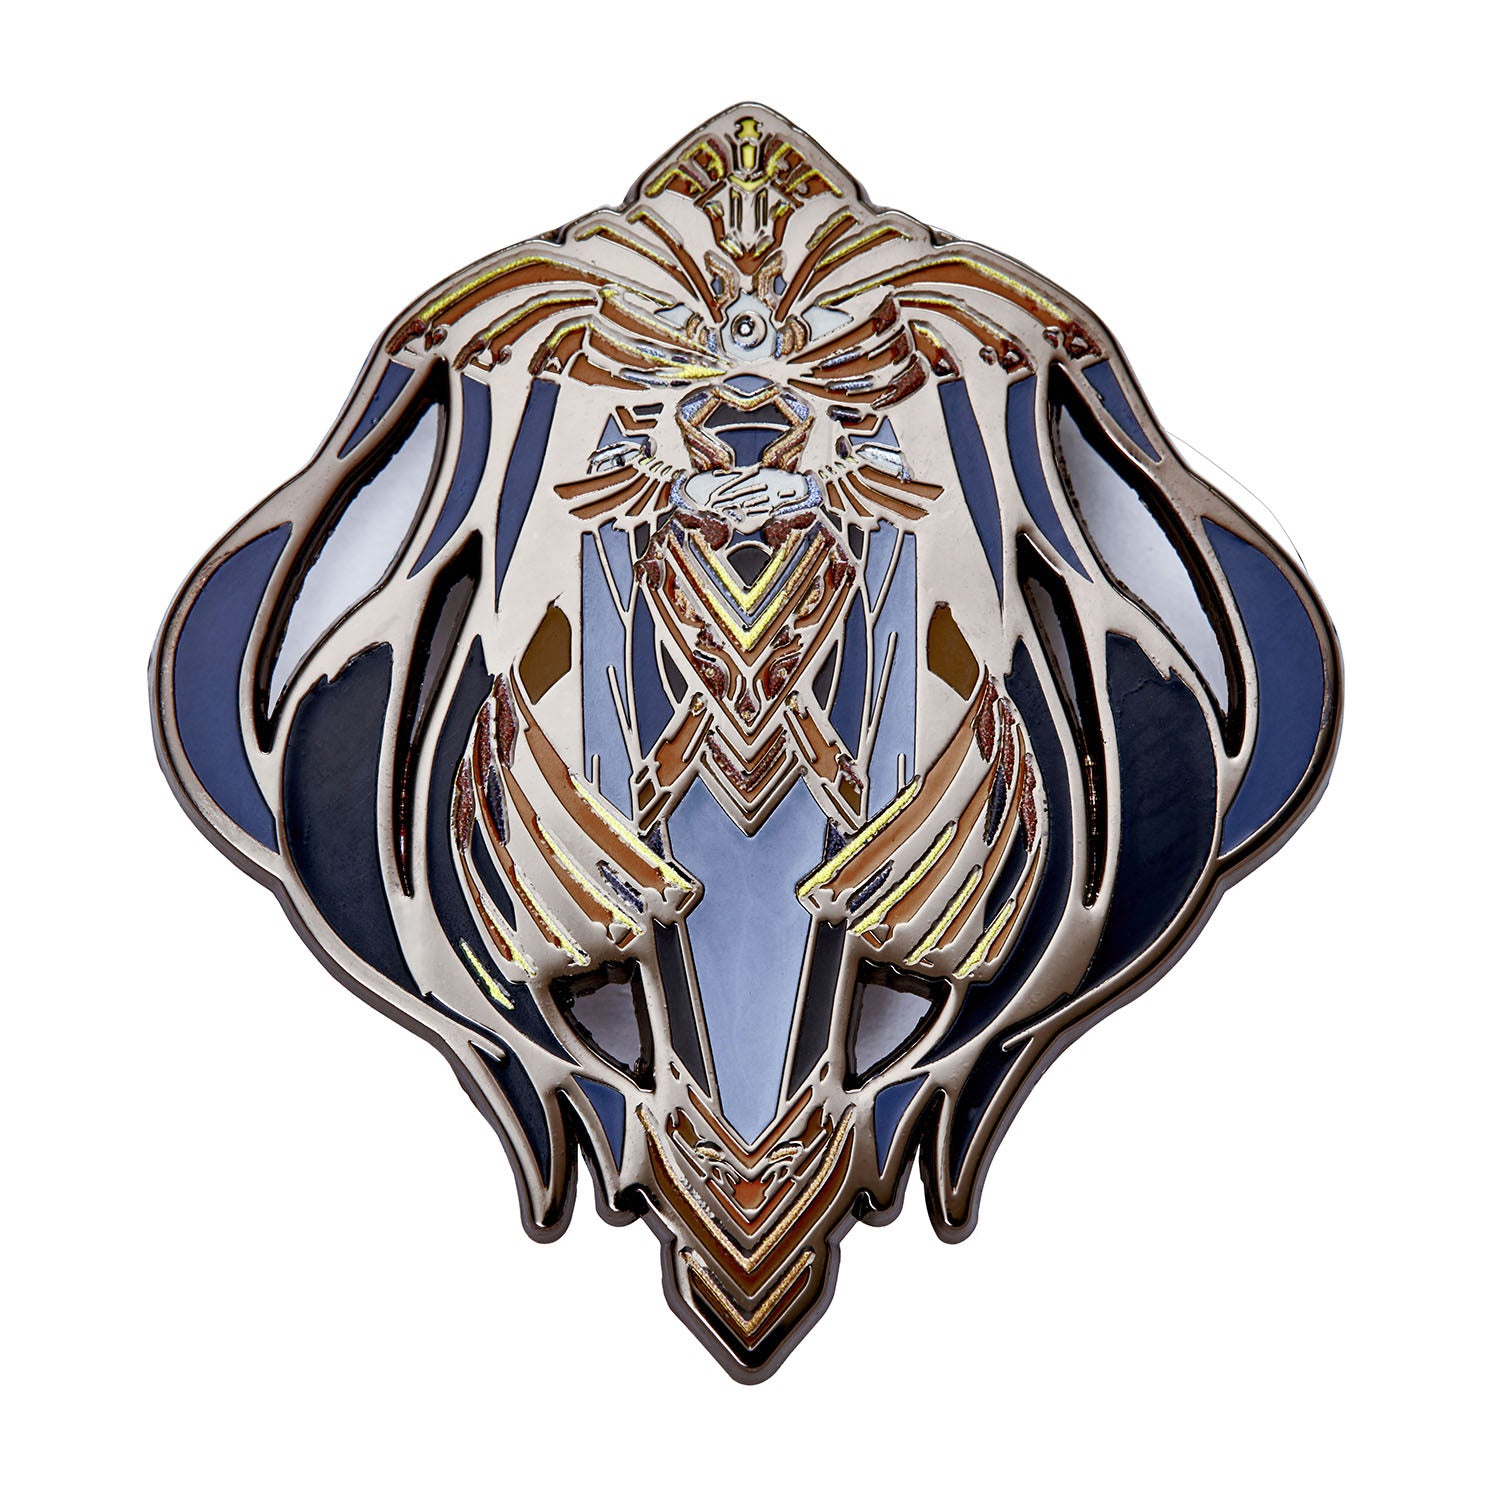 Blizzard Series 8 Collector's Edition Pin Set in Gold - Fifth Pin Image